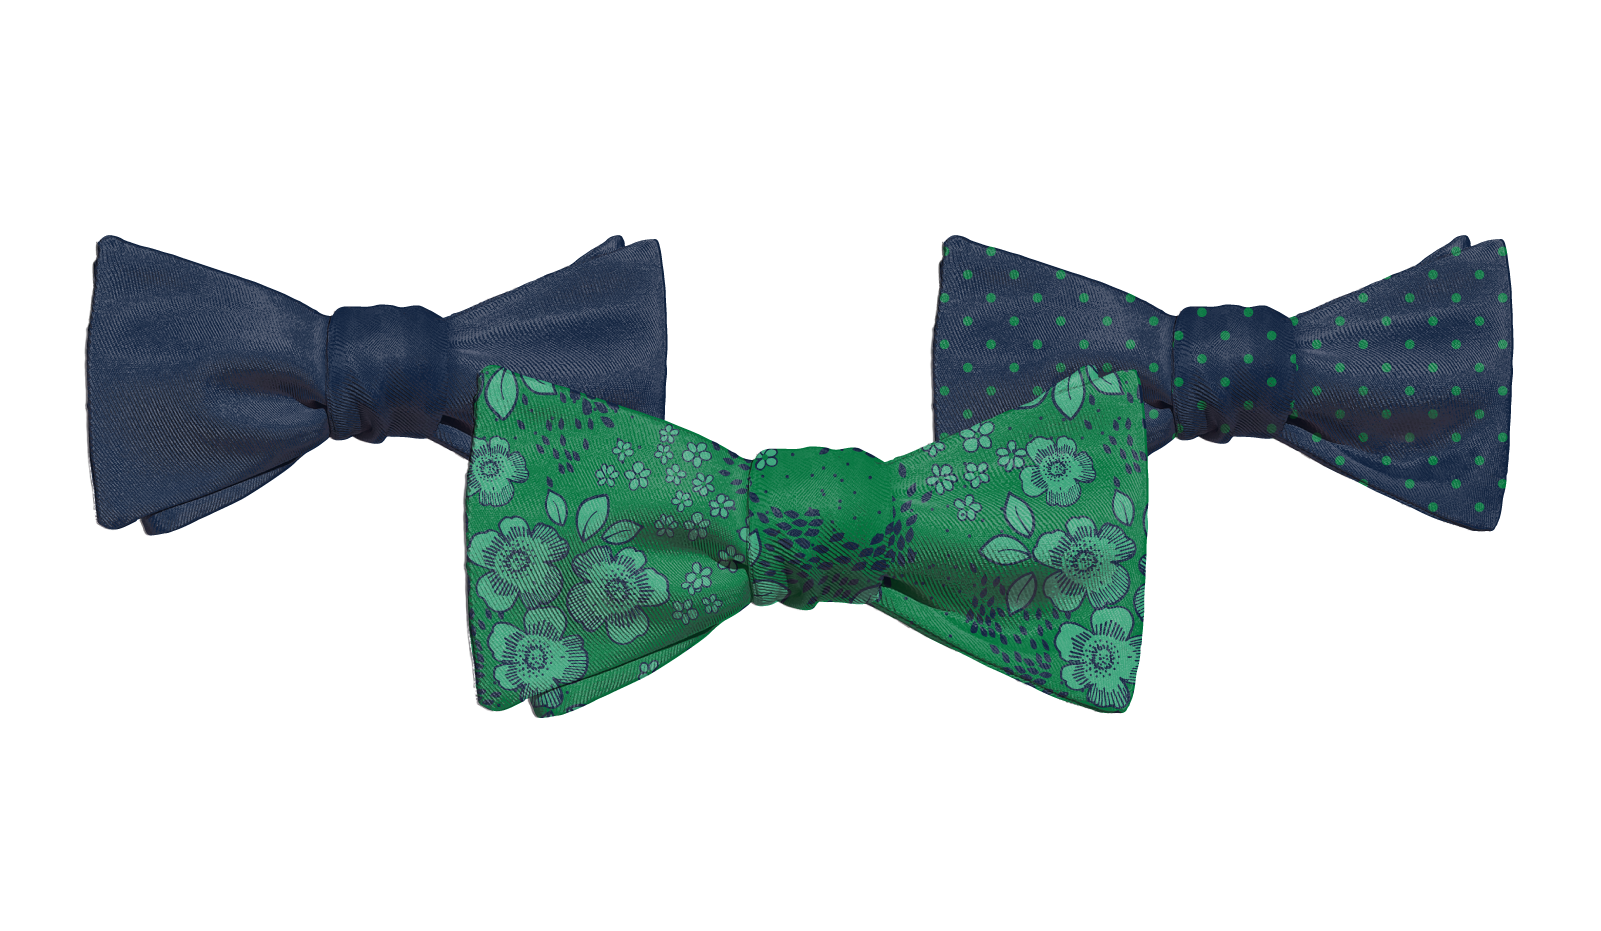 Three custom wedding bowties floral dots and solid color